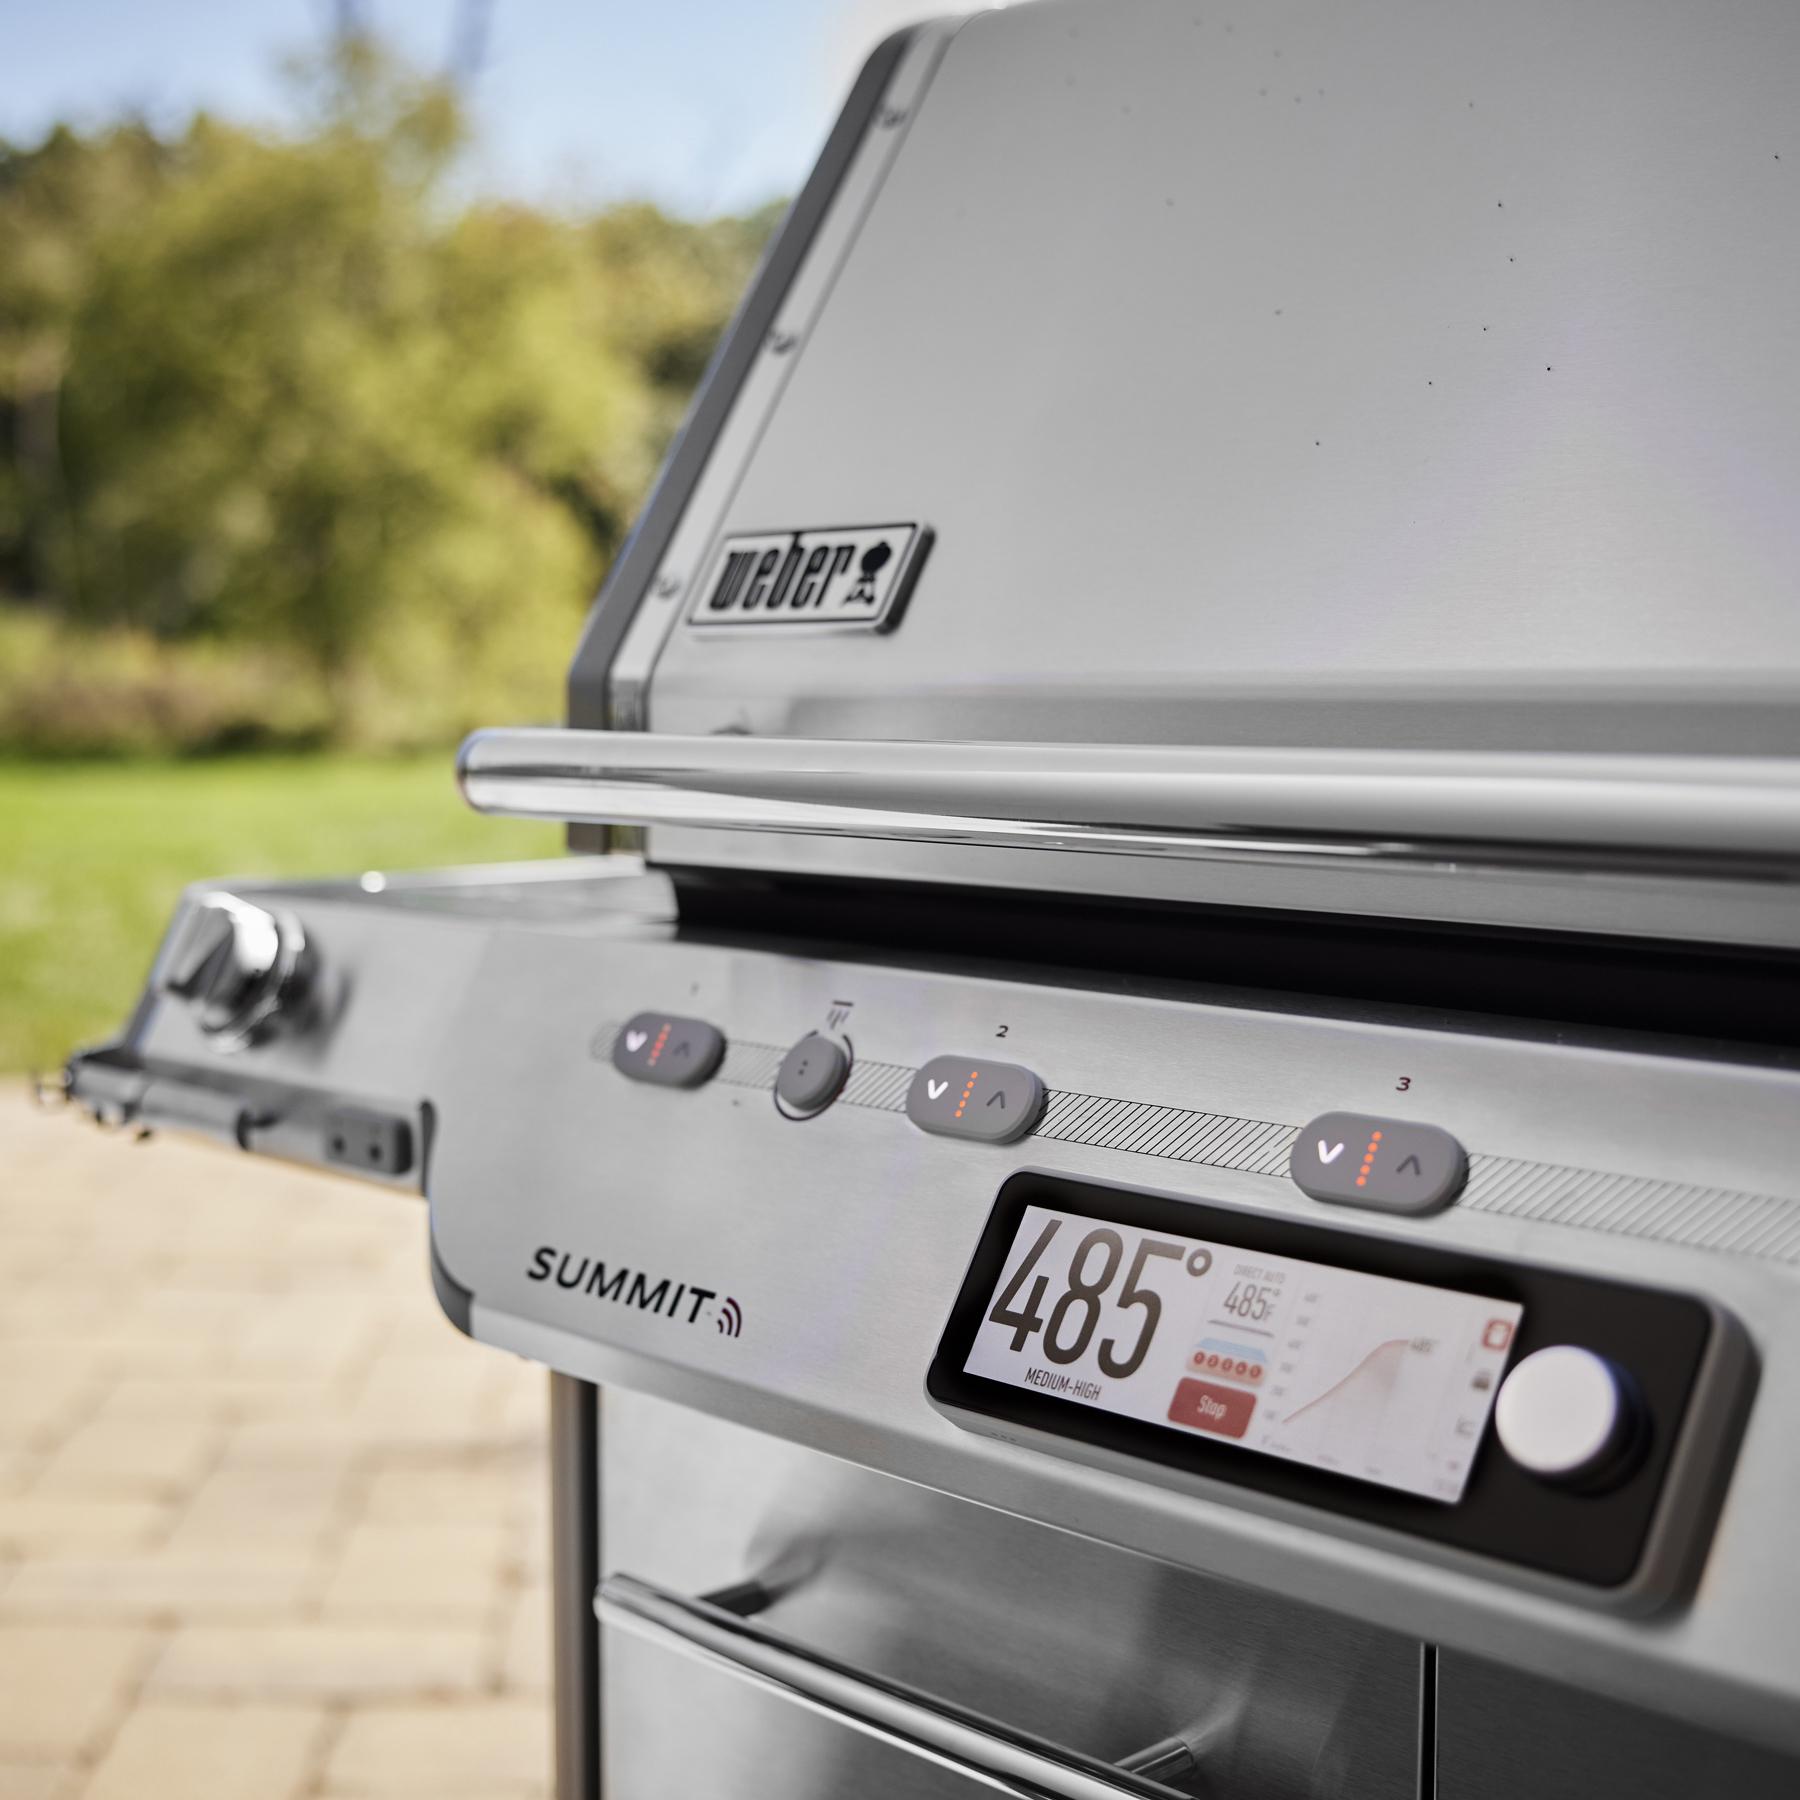 Weber Summit® Smart FS38X S Gas Grill (Natural Gas) - Stainless Steel